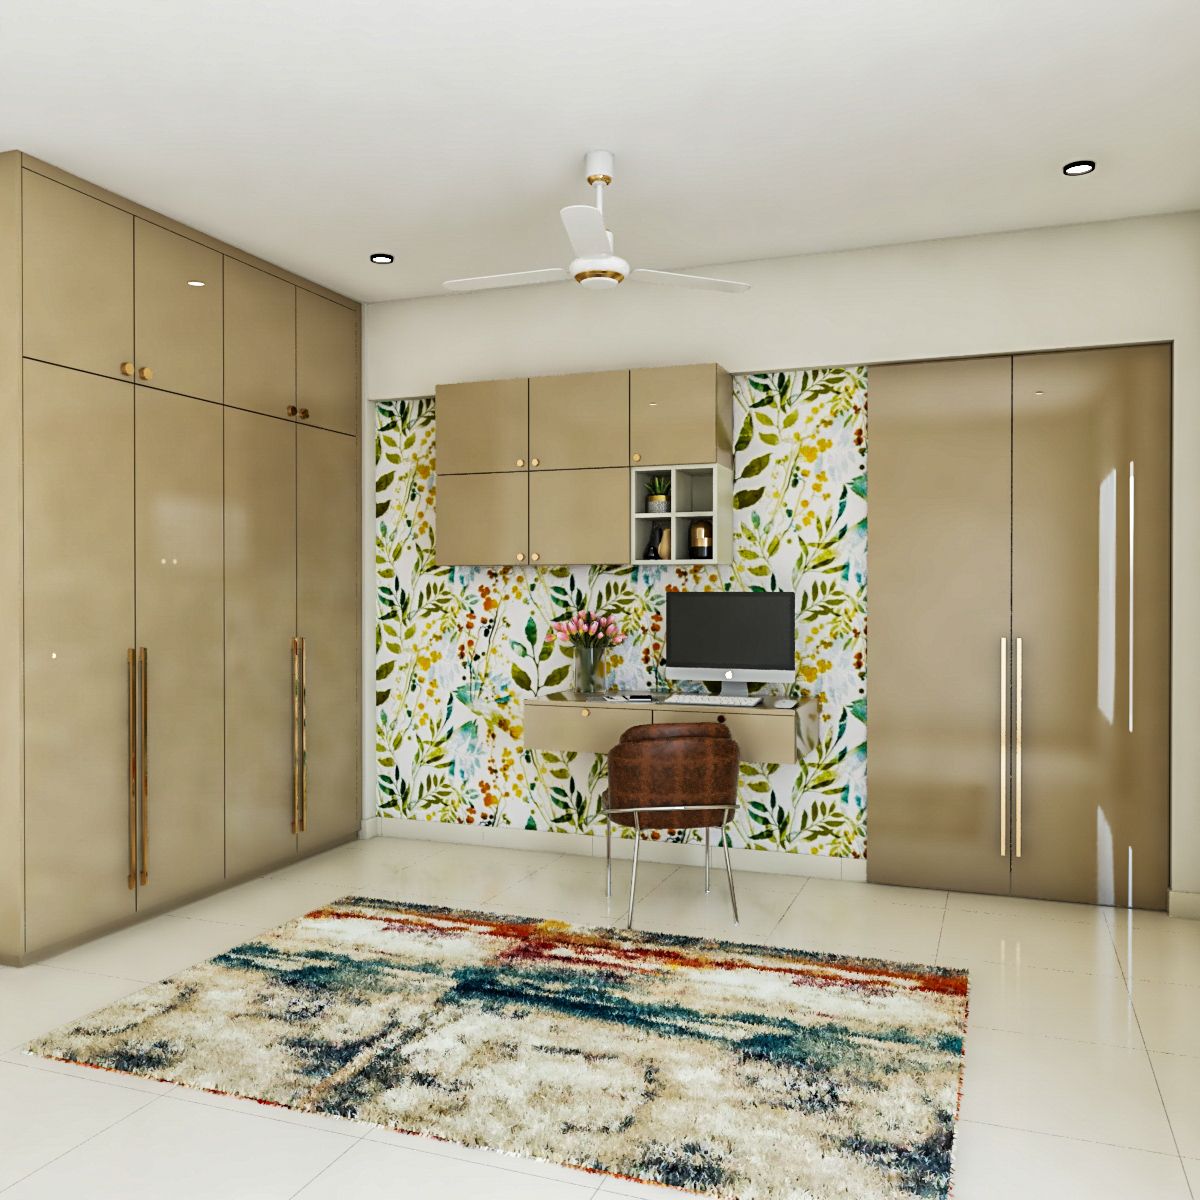 Modern Study Room Design With Beige Floating Unit And Tropical Wallpaper